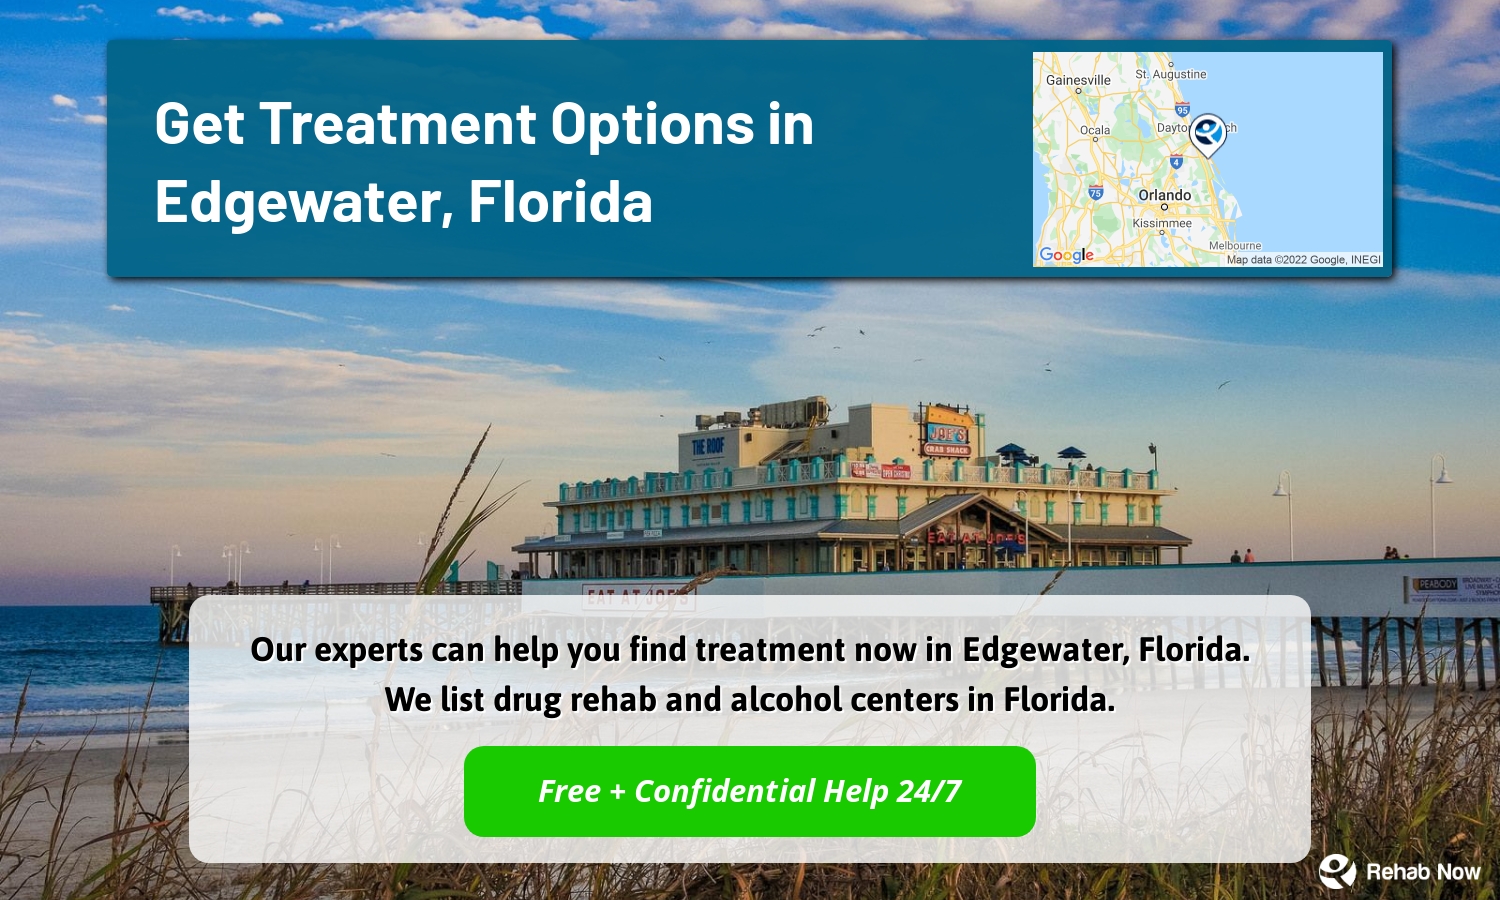 Our experts can help you find treatment now in Edgewater, Florida. We list drug rehab and alcohol centers in Florida.